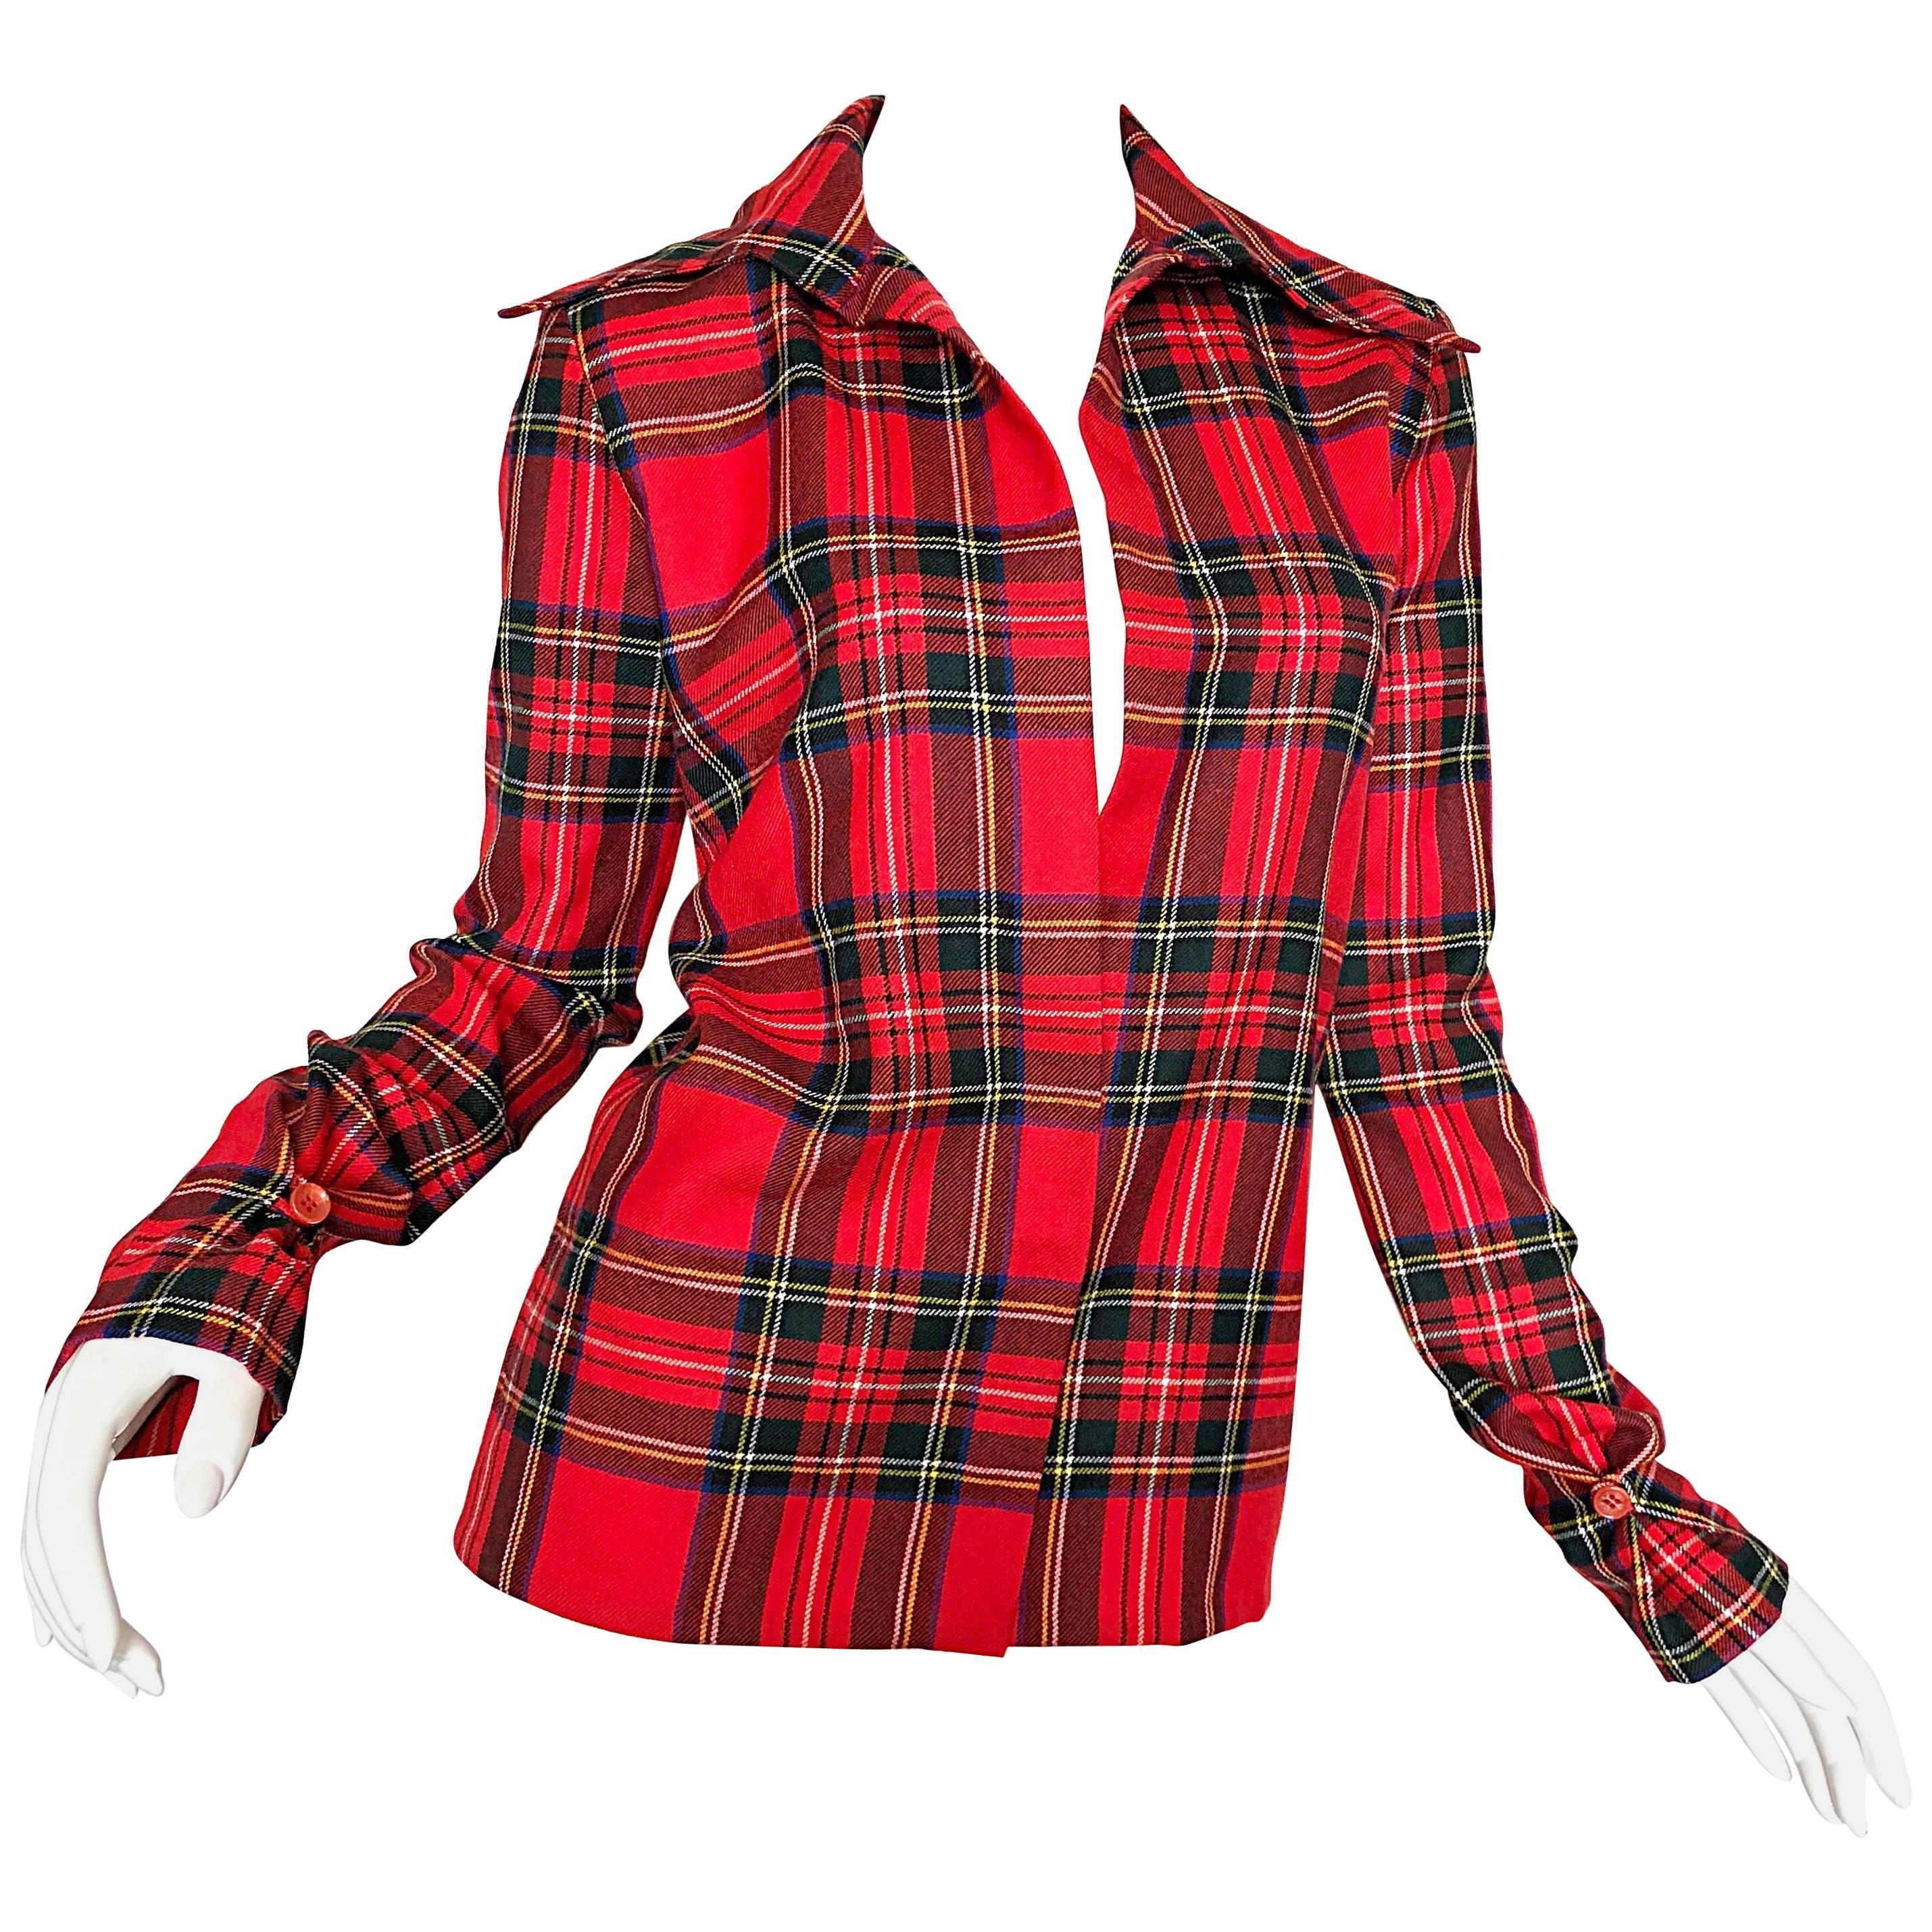 Dolce & Gabbana 1990s Red Tartan Plaid Virgin Wool 90s Plunging Flannel Shirt For Sale